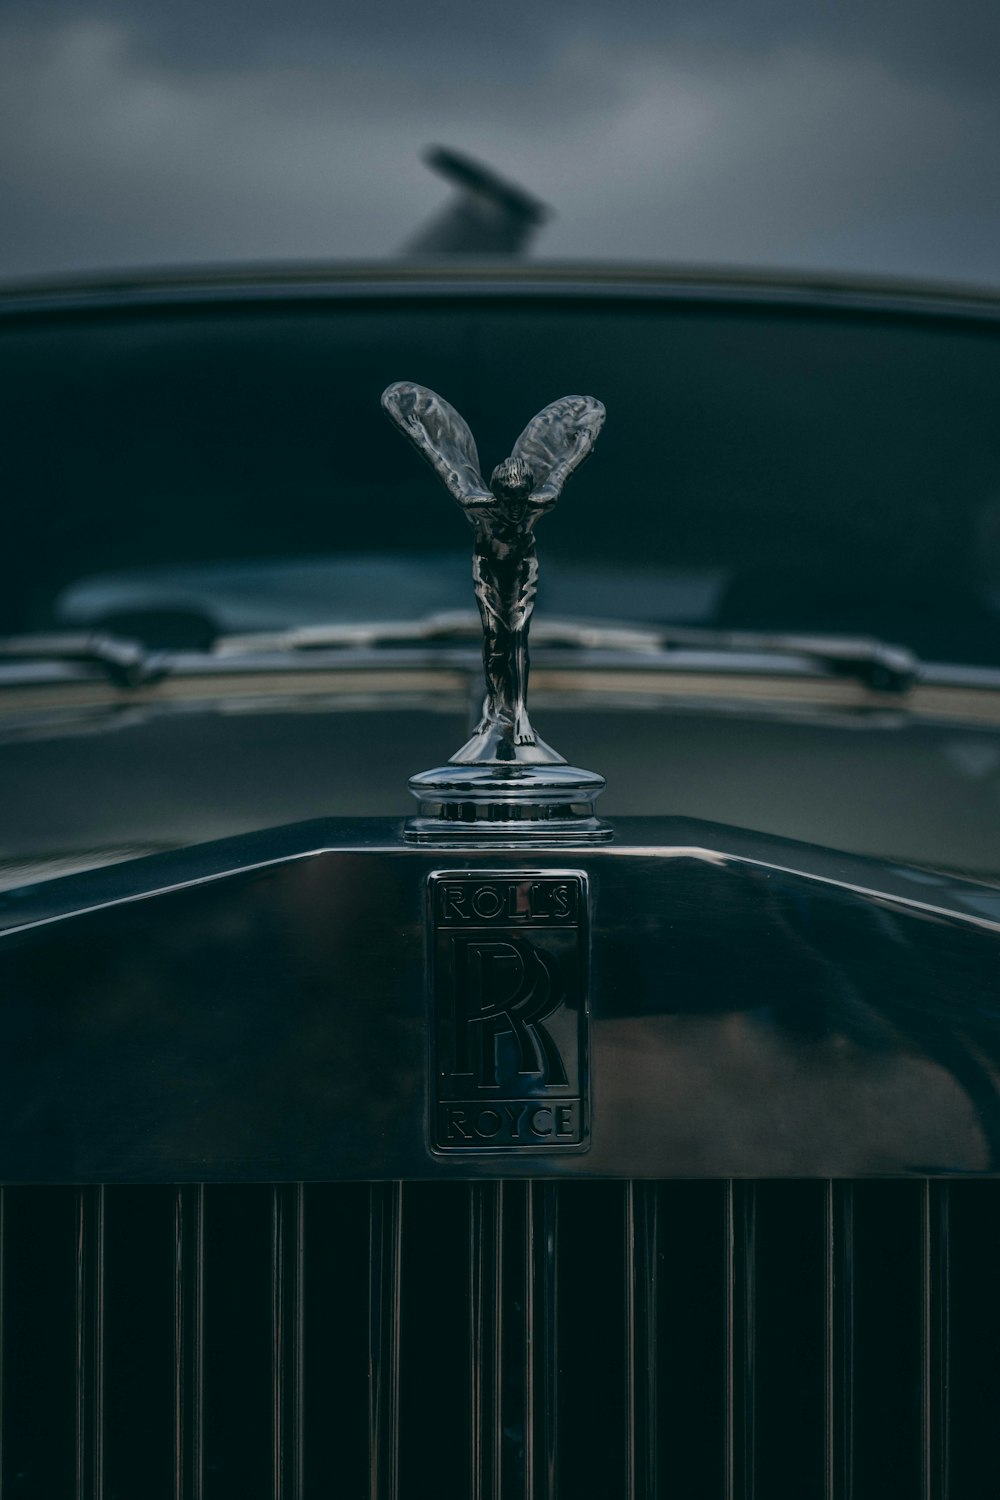 the emblem on the front of a vintage car